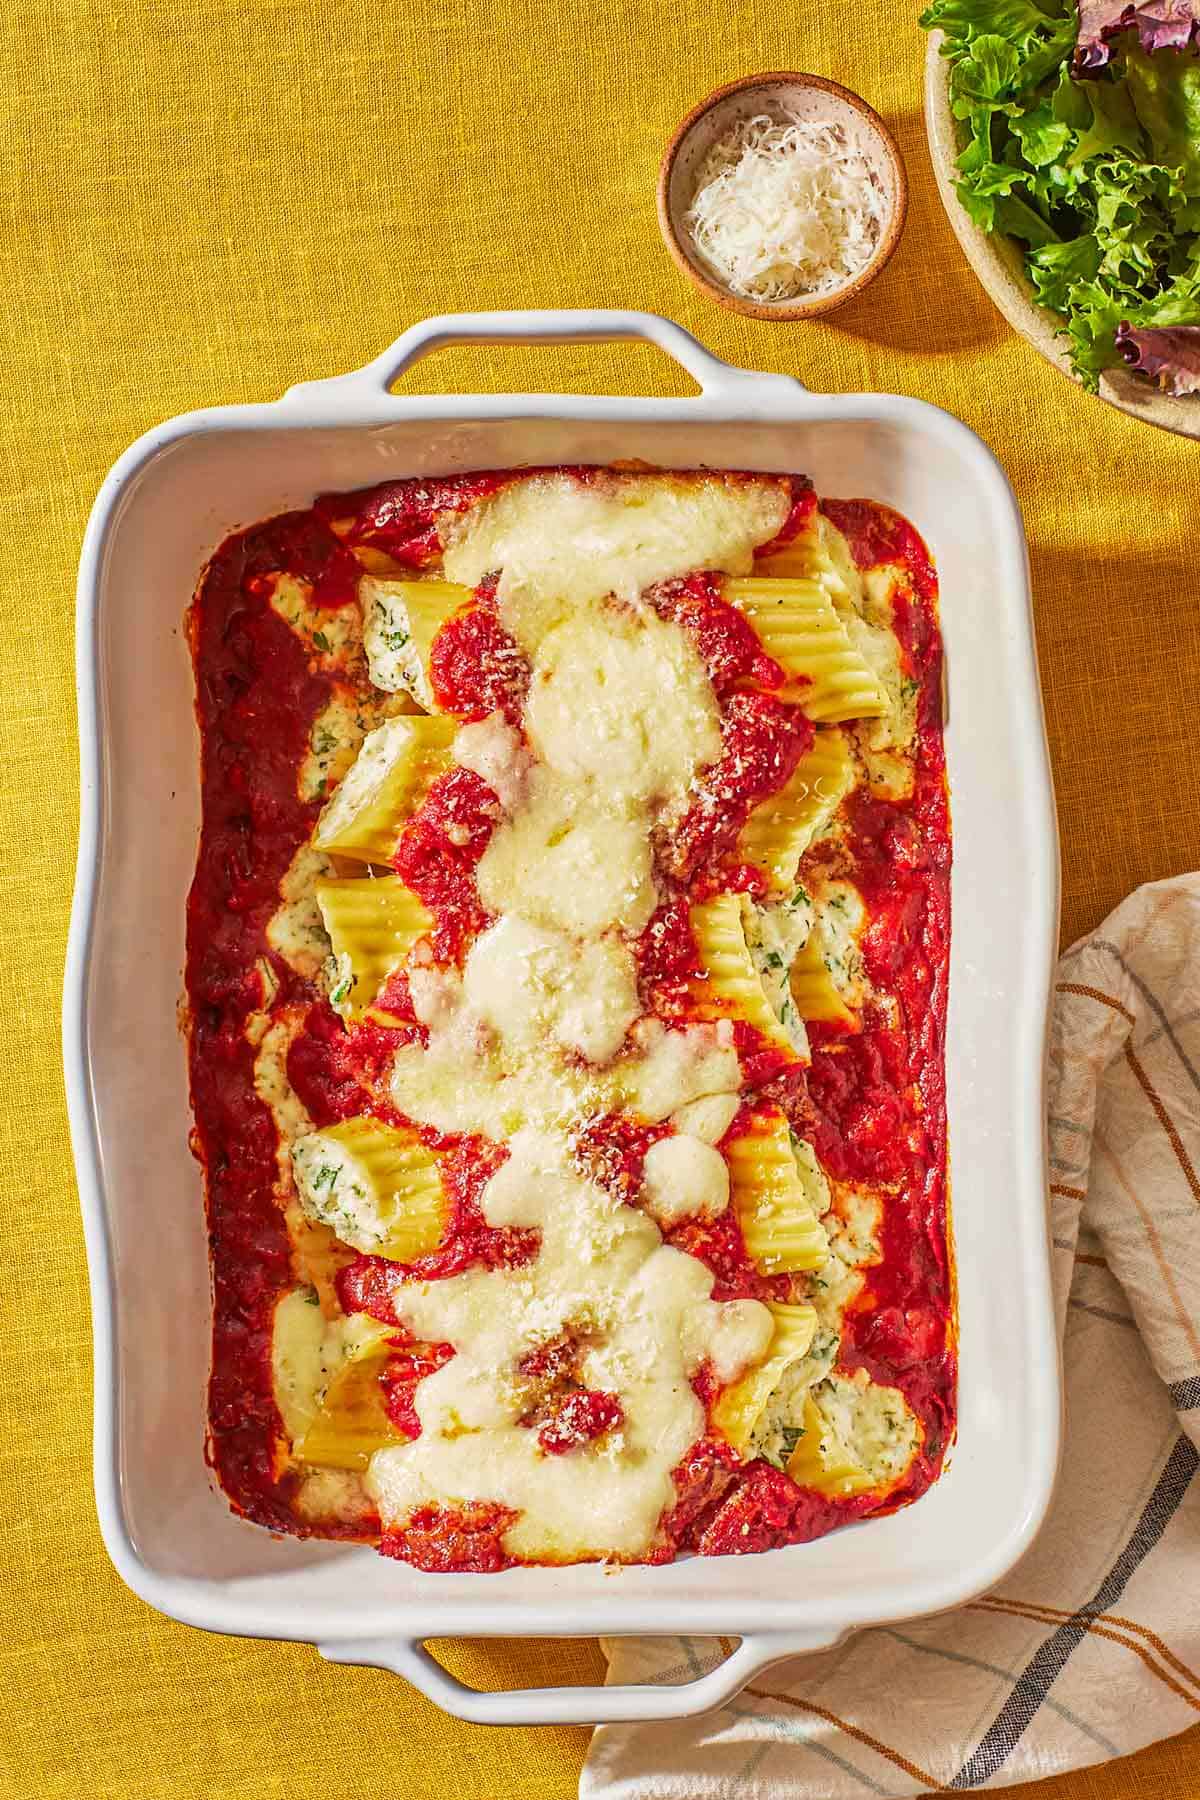 Several pieces of baked manicotti topped with spaghetti sauce and mozzarella in a baking dish next to a bowls of salad, and grated parmesan cheese.